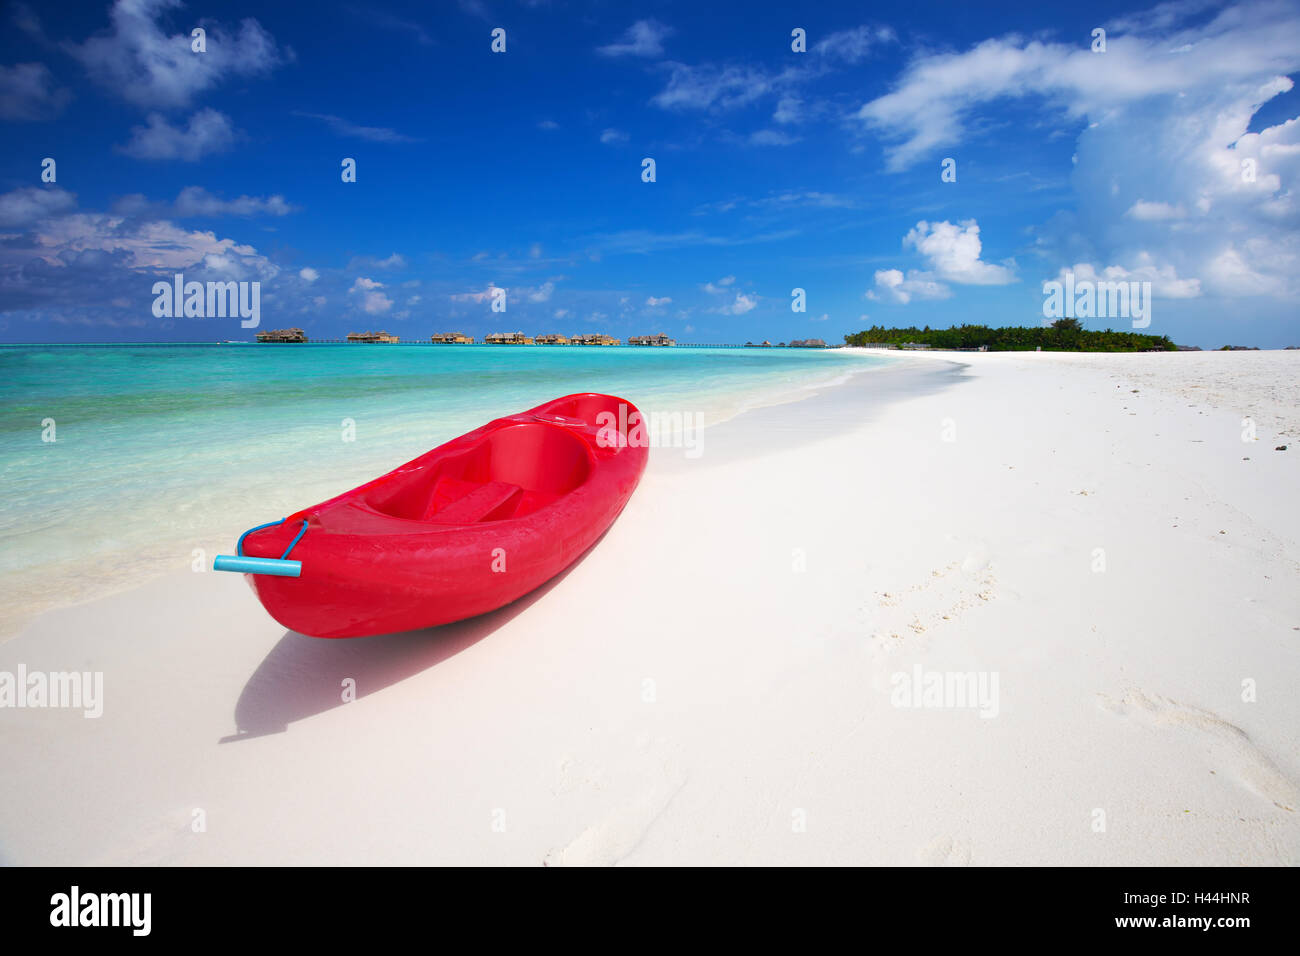 Red kayak on tropic beach with palm trees and overwater bungalows Stock Photo